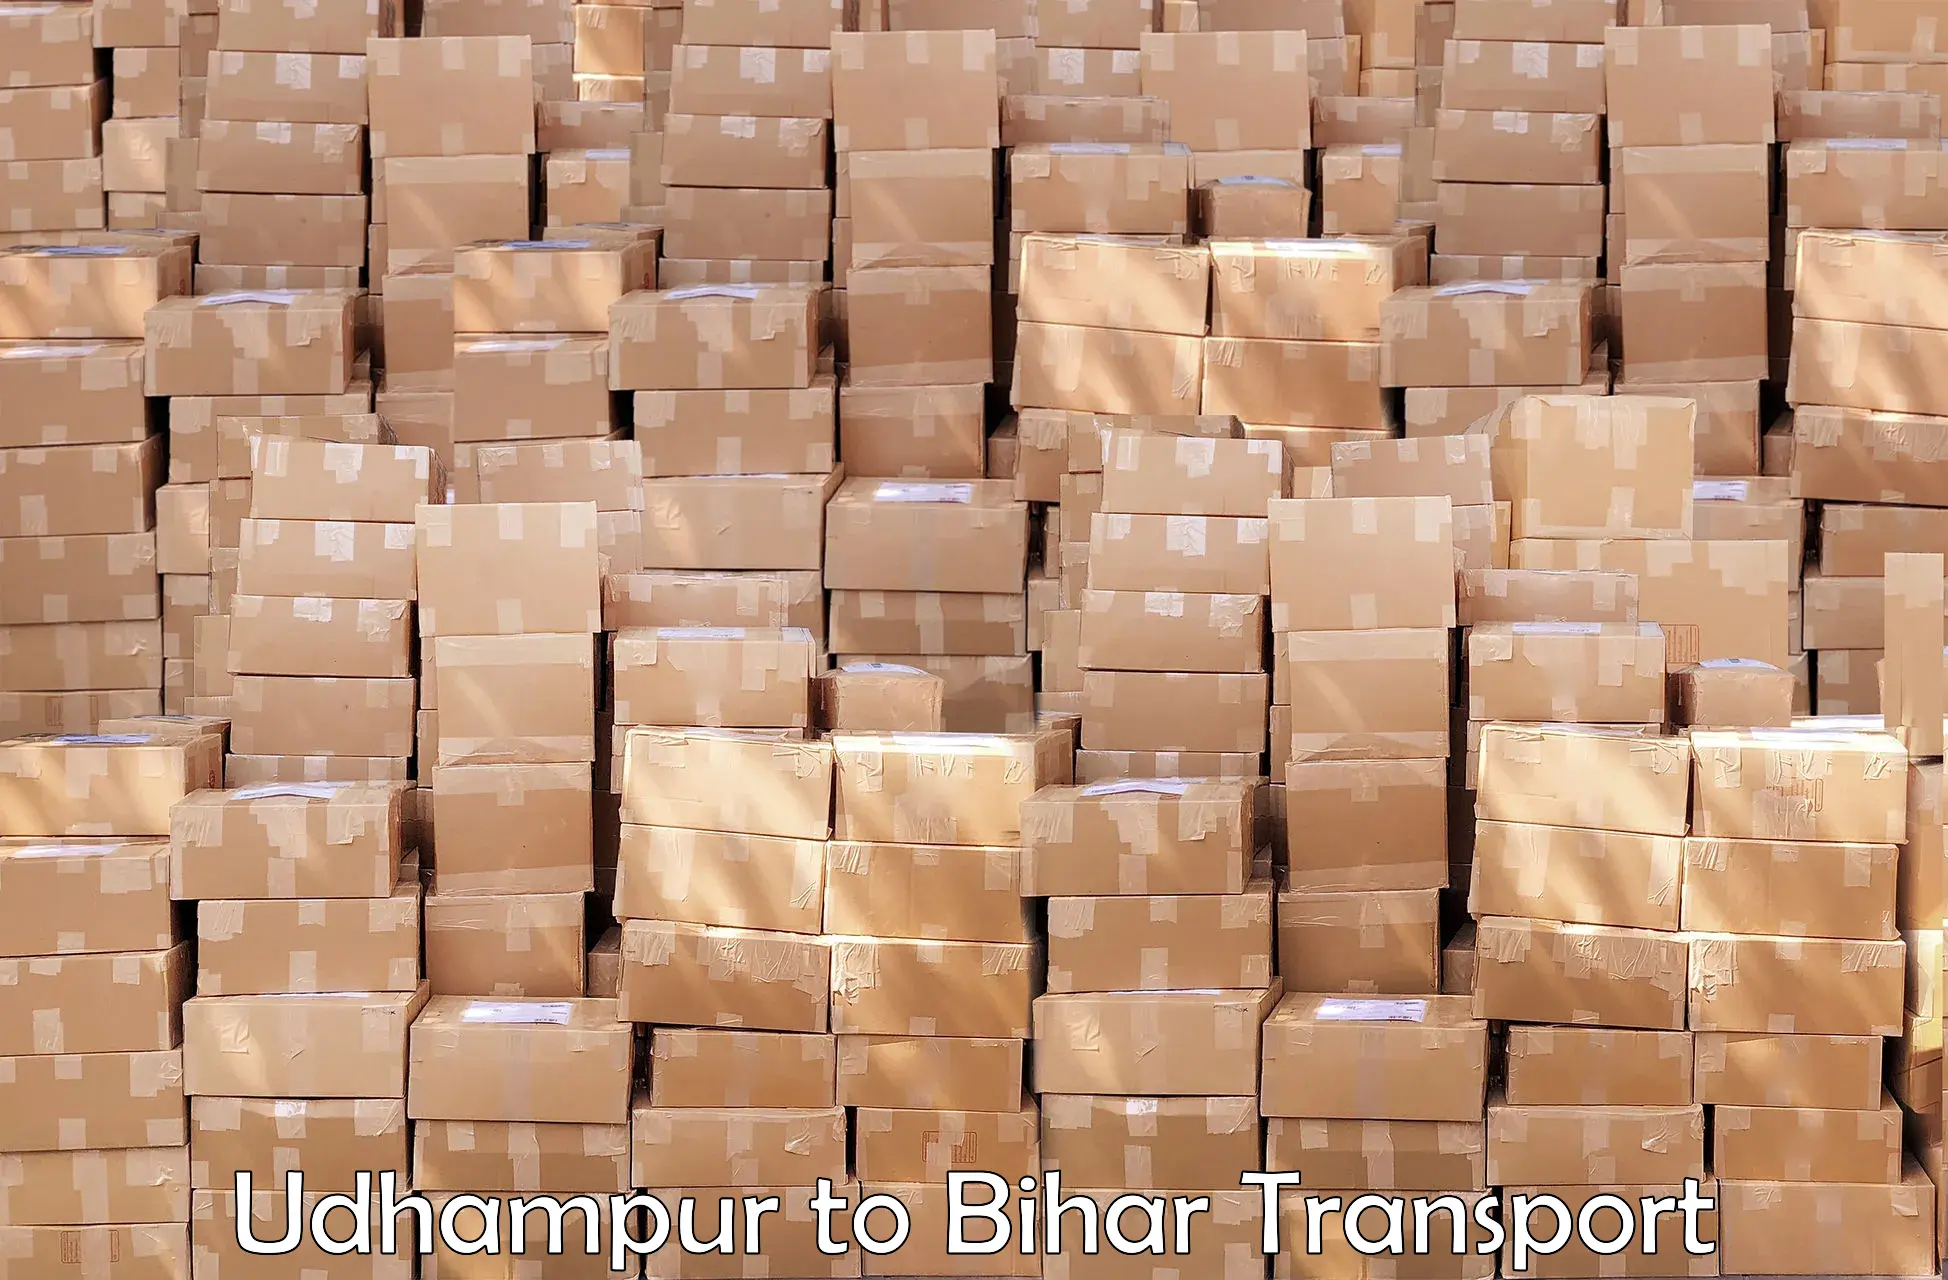 Truck transport companies in India in Udhampur to Bakhri